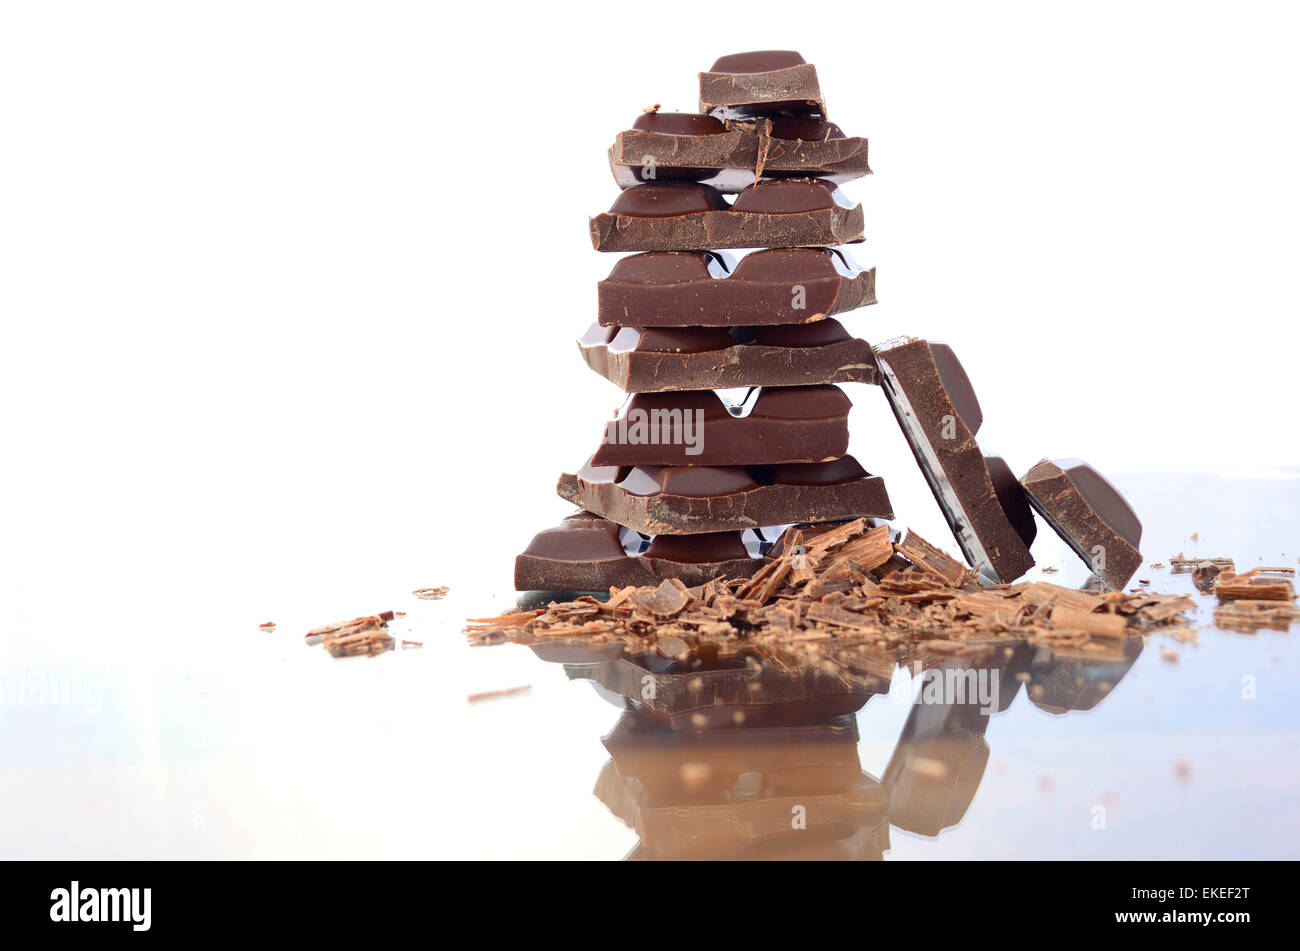 Stack of chocolate on reflective glass against white background. Stock Photo